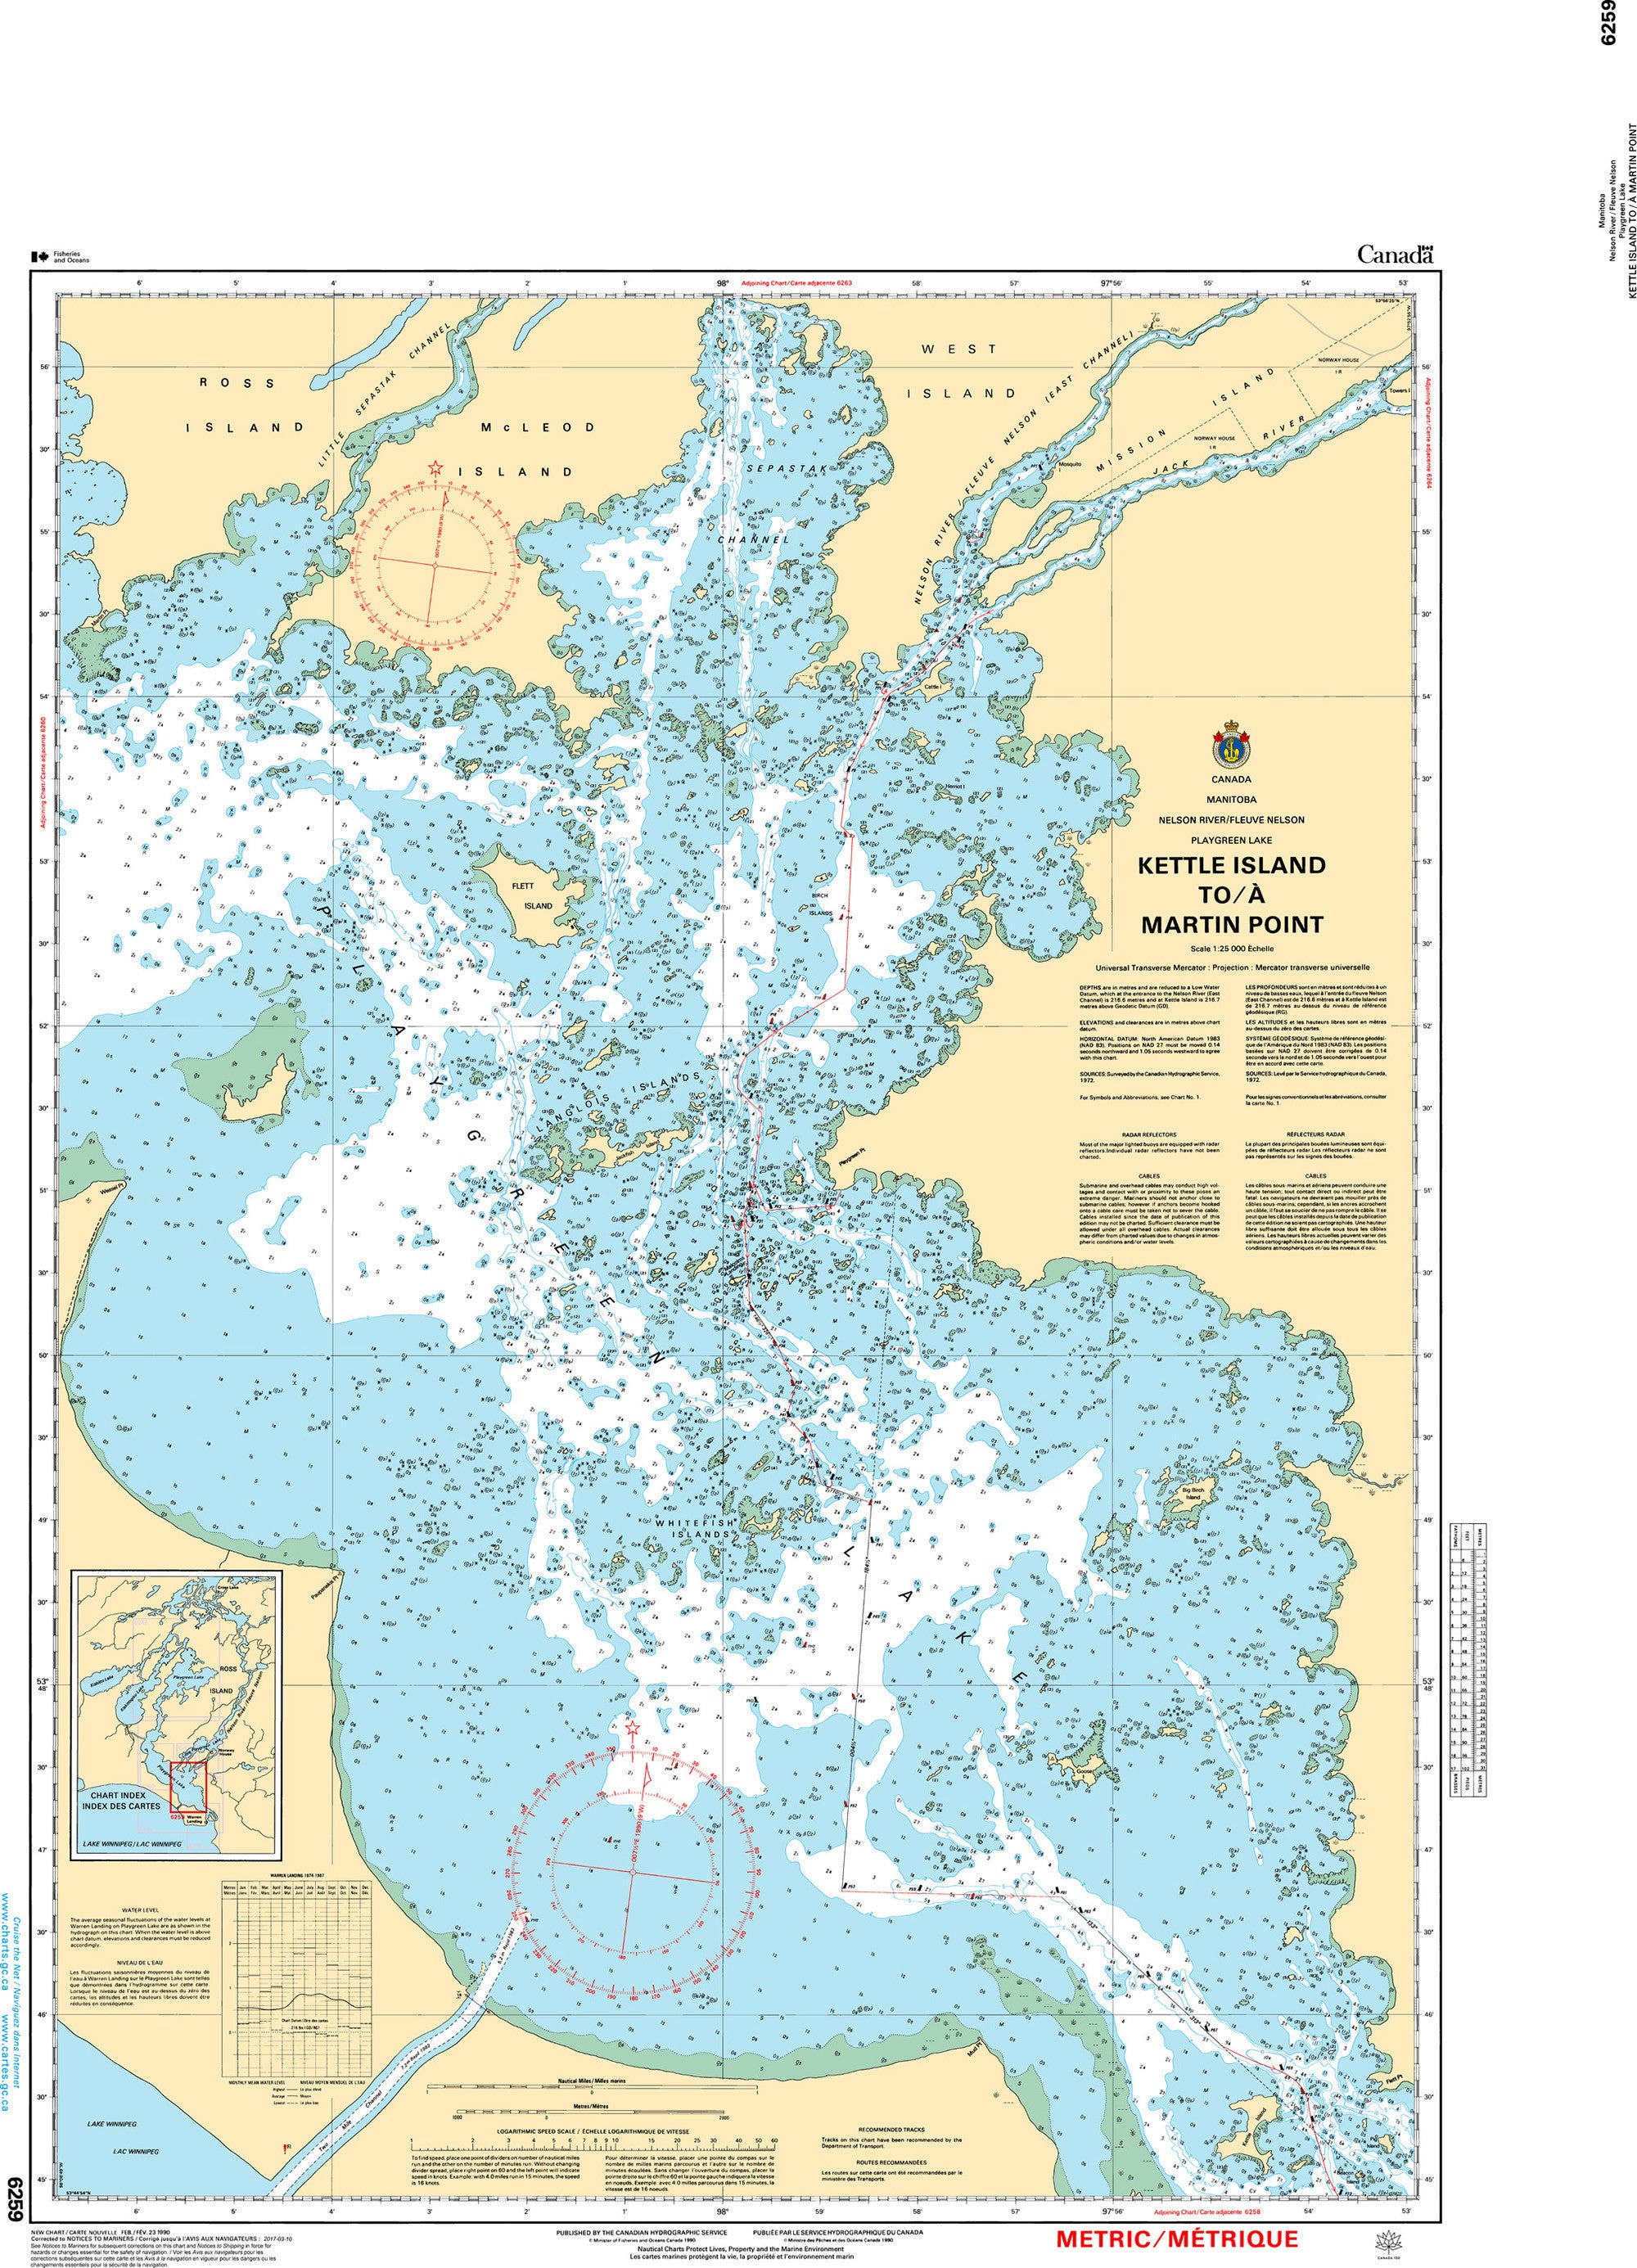 Canadian Hydrographic Service Nautical Chart CHS6259: Kettle Island to/à Martin Point